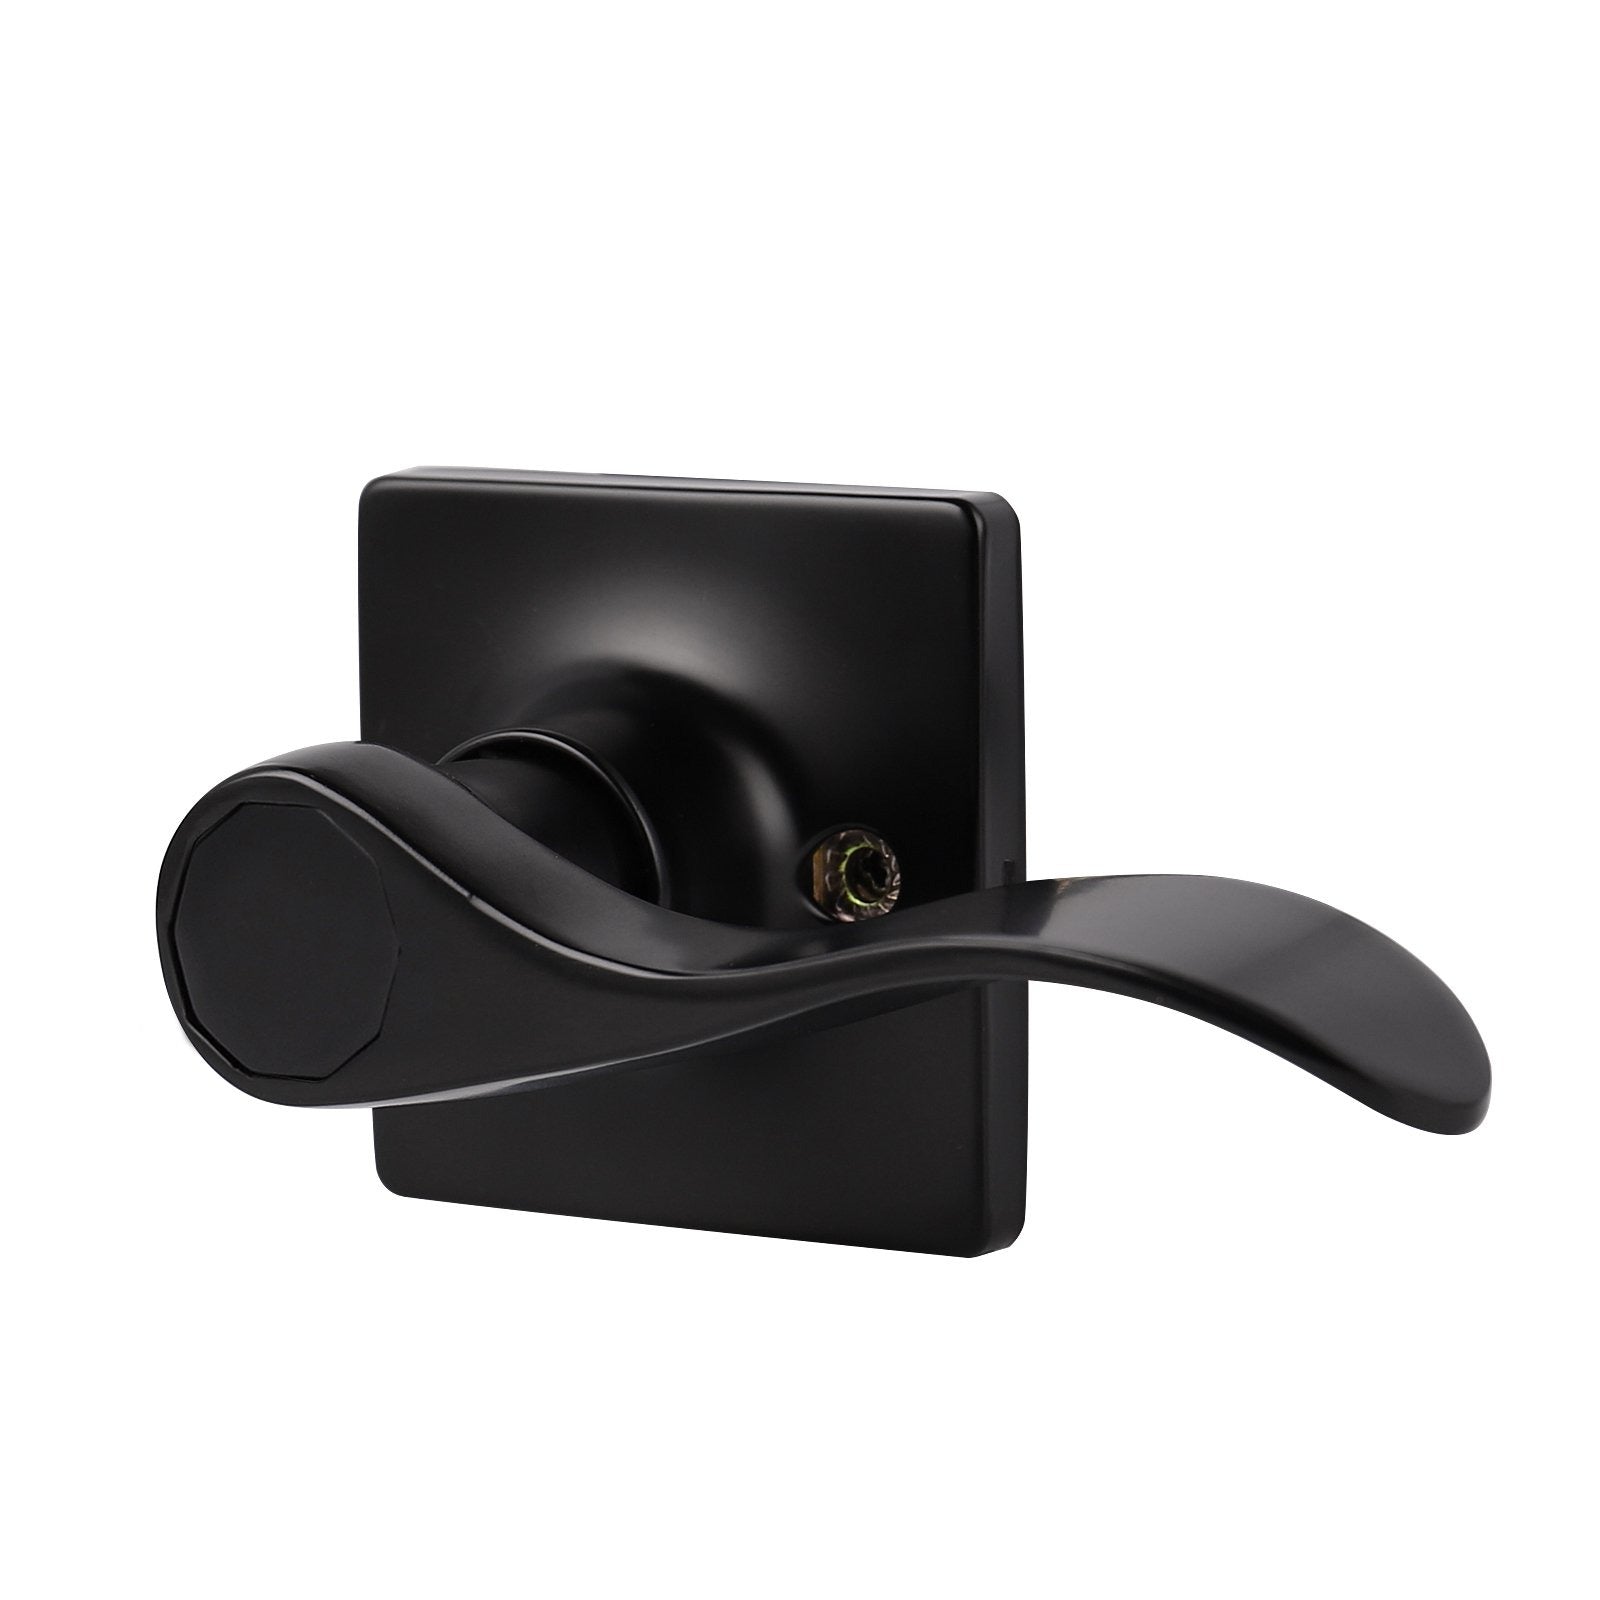 Wave Style Door Handles with Square Rosette, Entry Keyed/Privacy Lock/Passage/Dummy Lever Black Finish DLSQ061BK